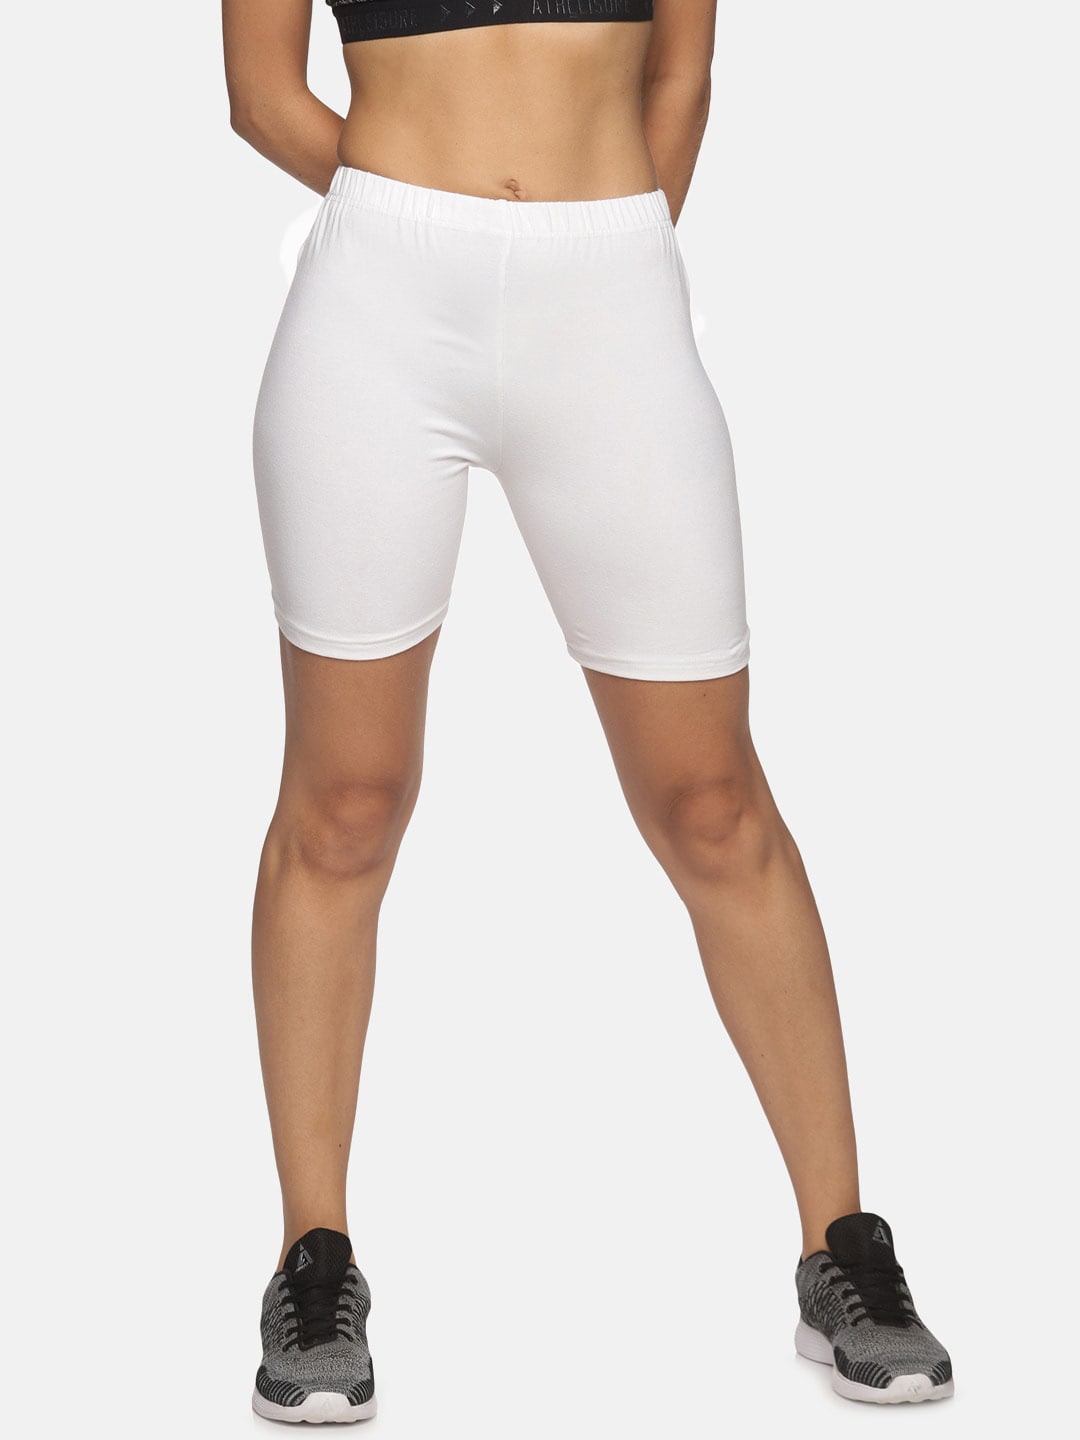 NOT YET by us Women Slim Fit Outdoor Sports Shorts Price in India